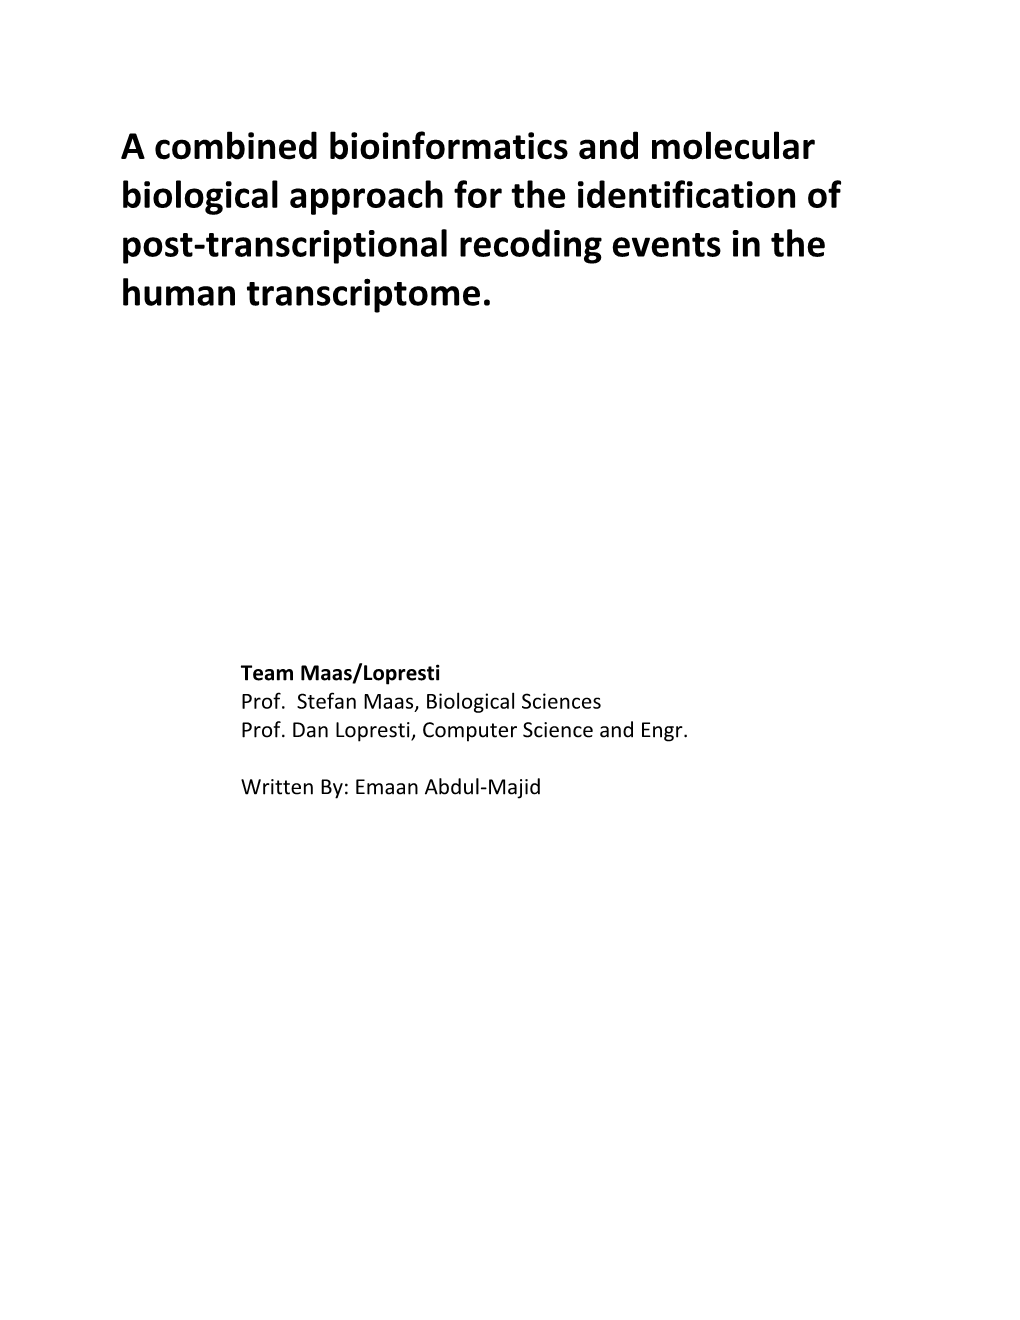 A Combined Bioinformatics and Molecular Biological Approach for the Identification Of